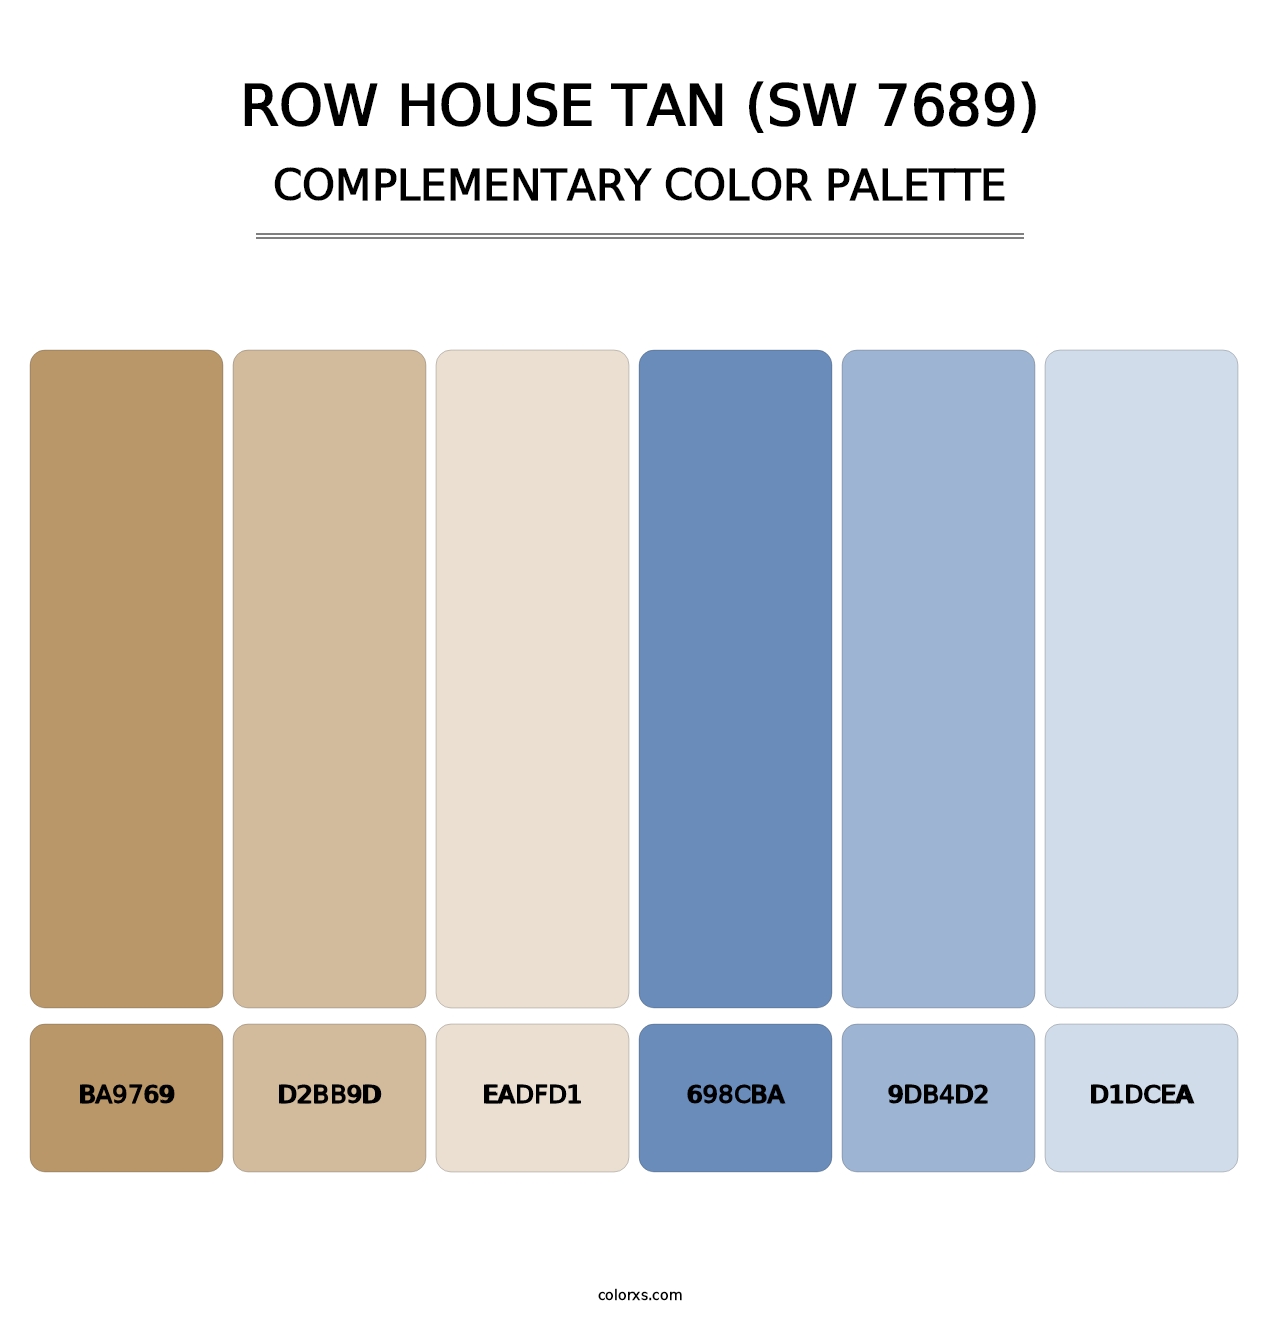 Row House Tan (SW 7689) - Complementary Color Palette